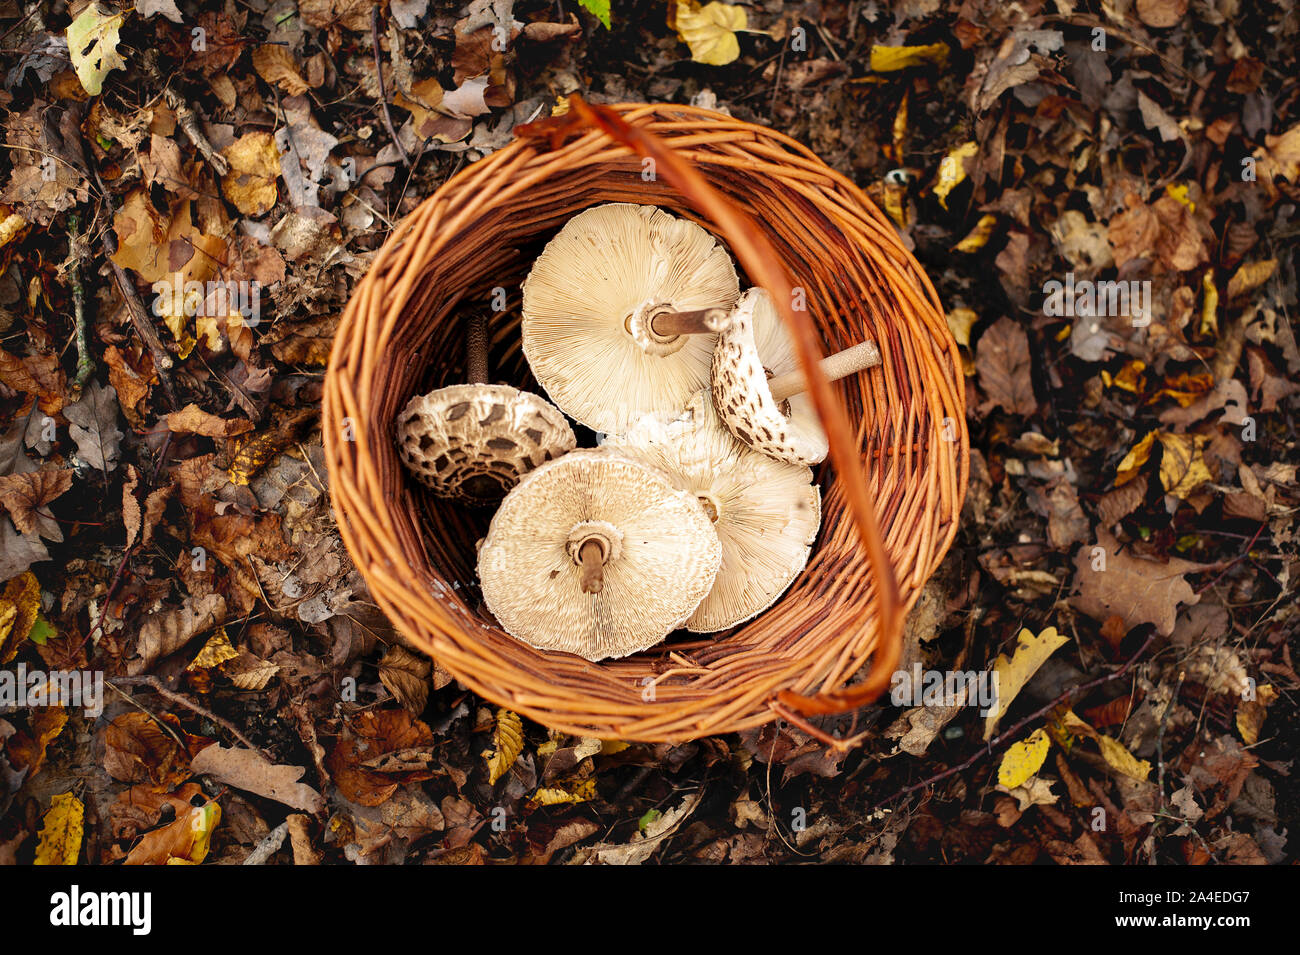 Basket with Parasol mushrooms standing on the autumnal forest ground in fallen leaves. Stock Photo